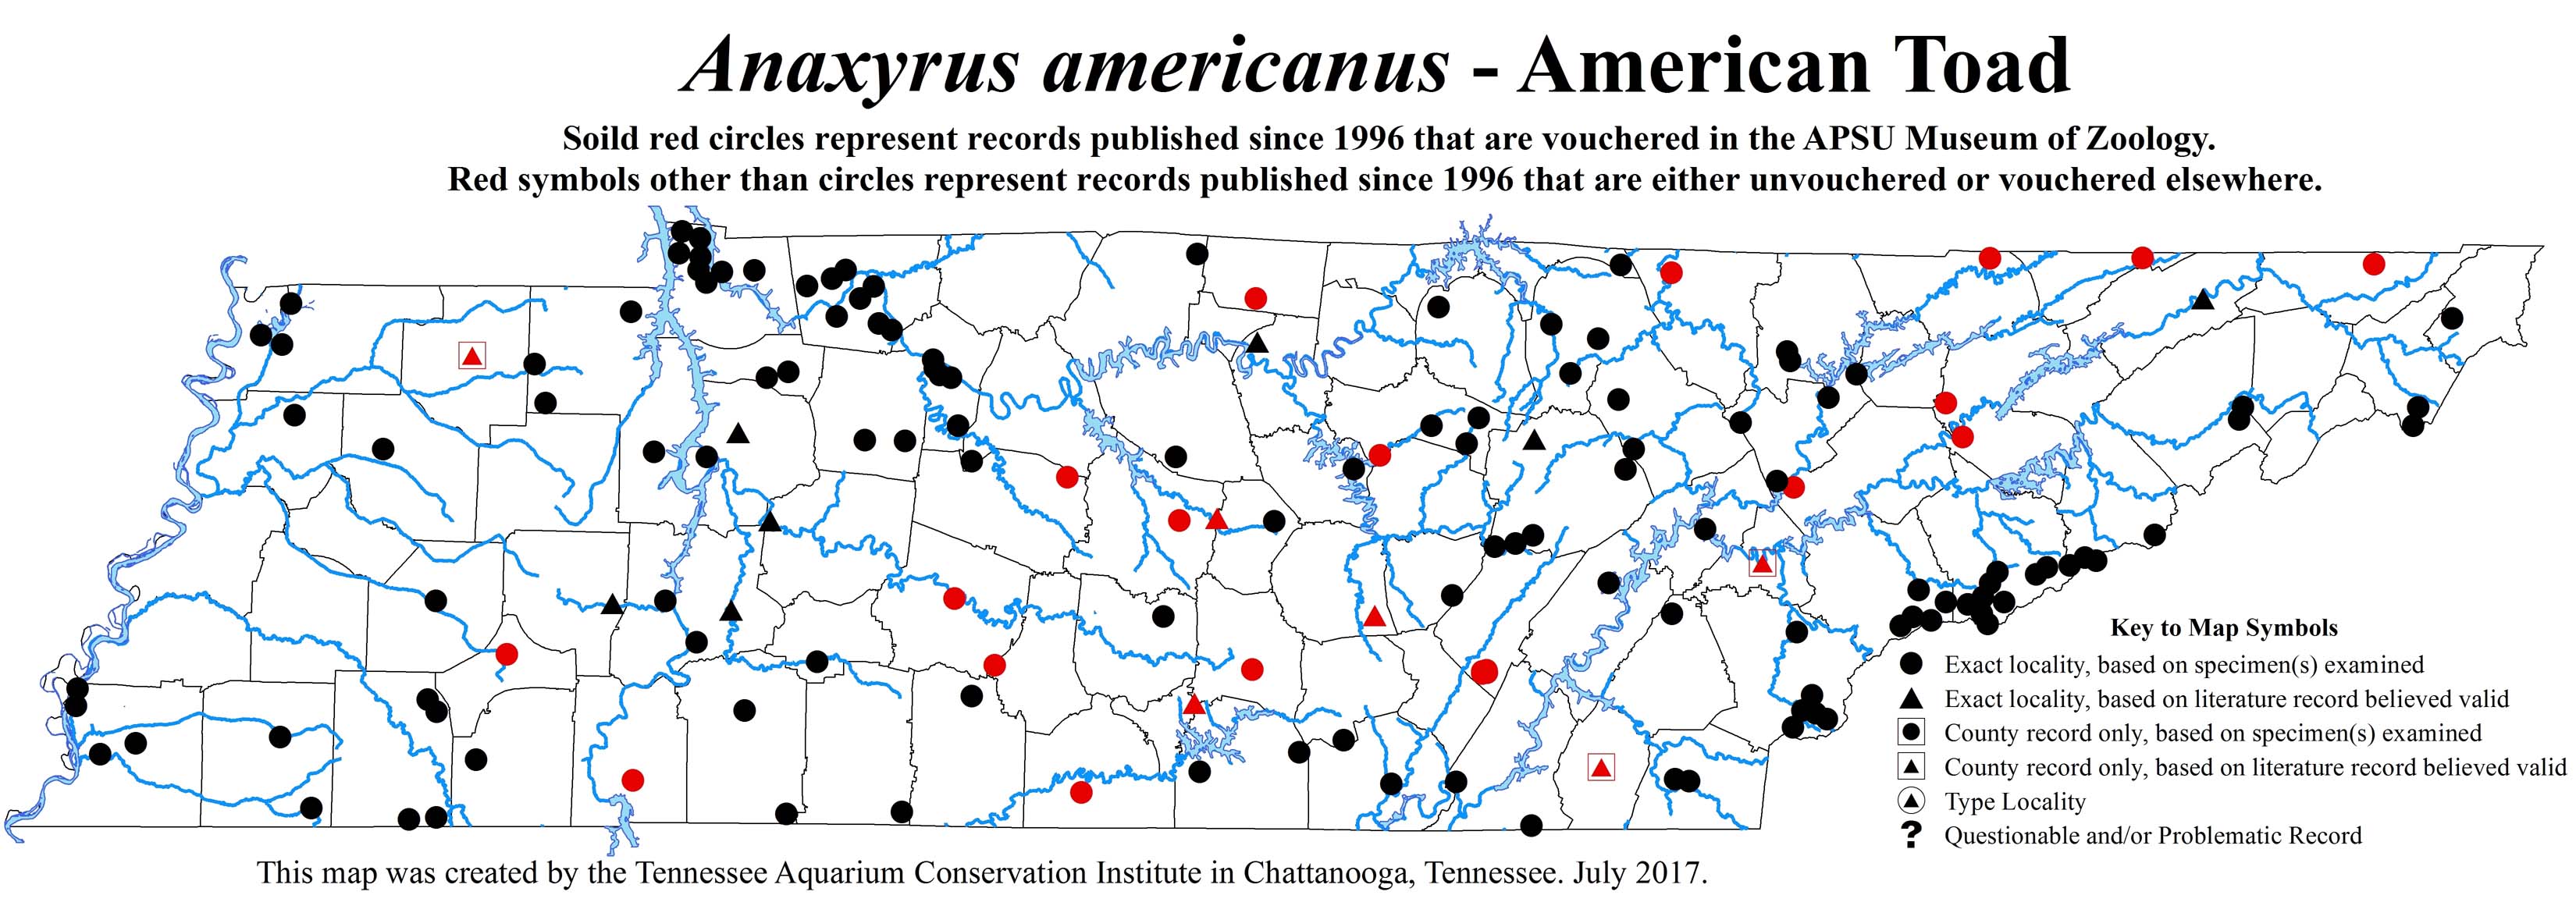 New Distribution Map - Anaxyrus americanus (Holbrook) - American Toad